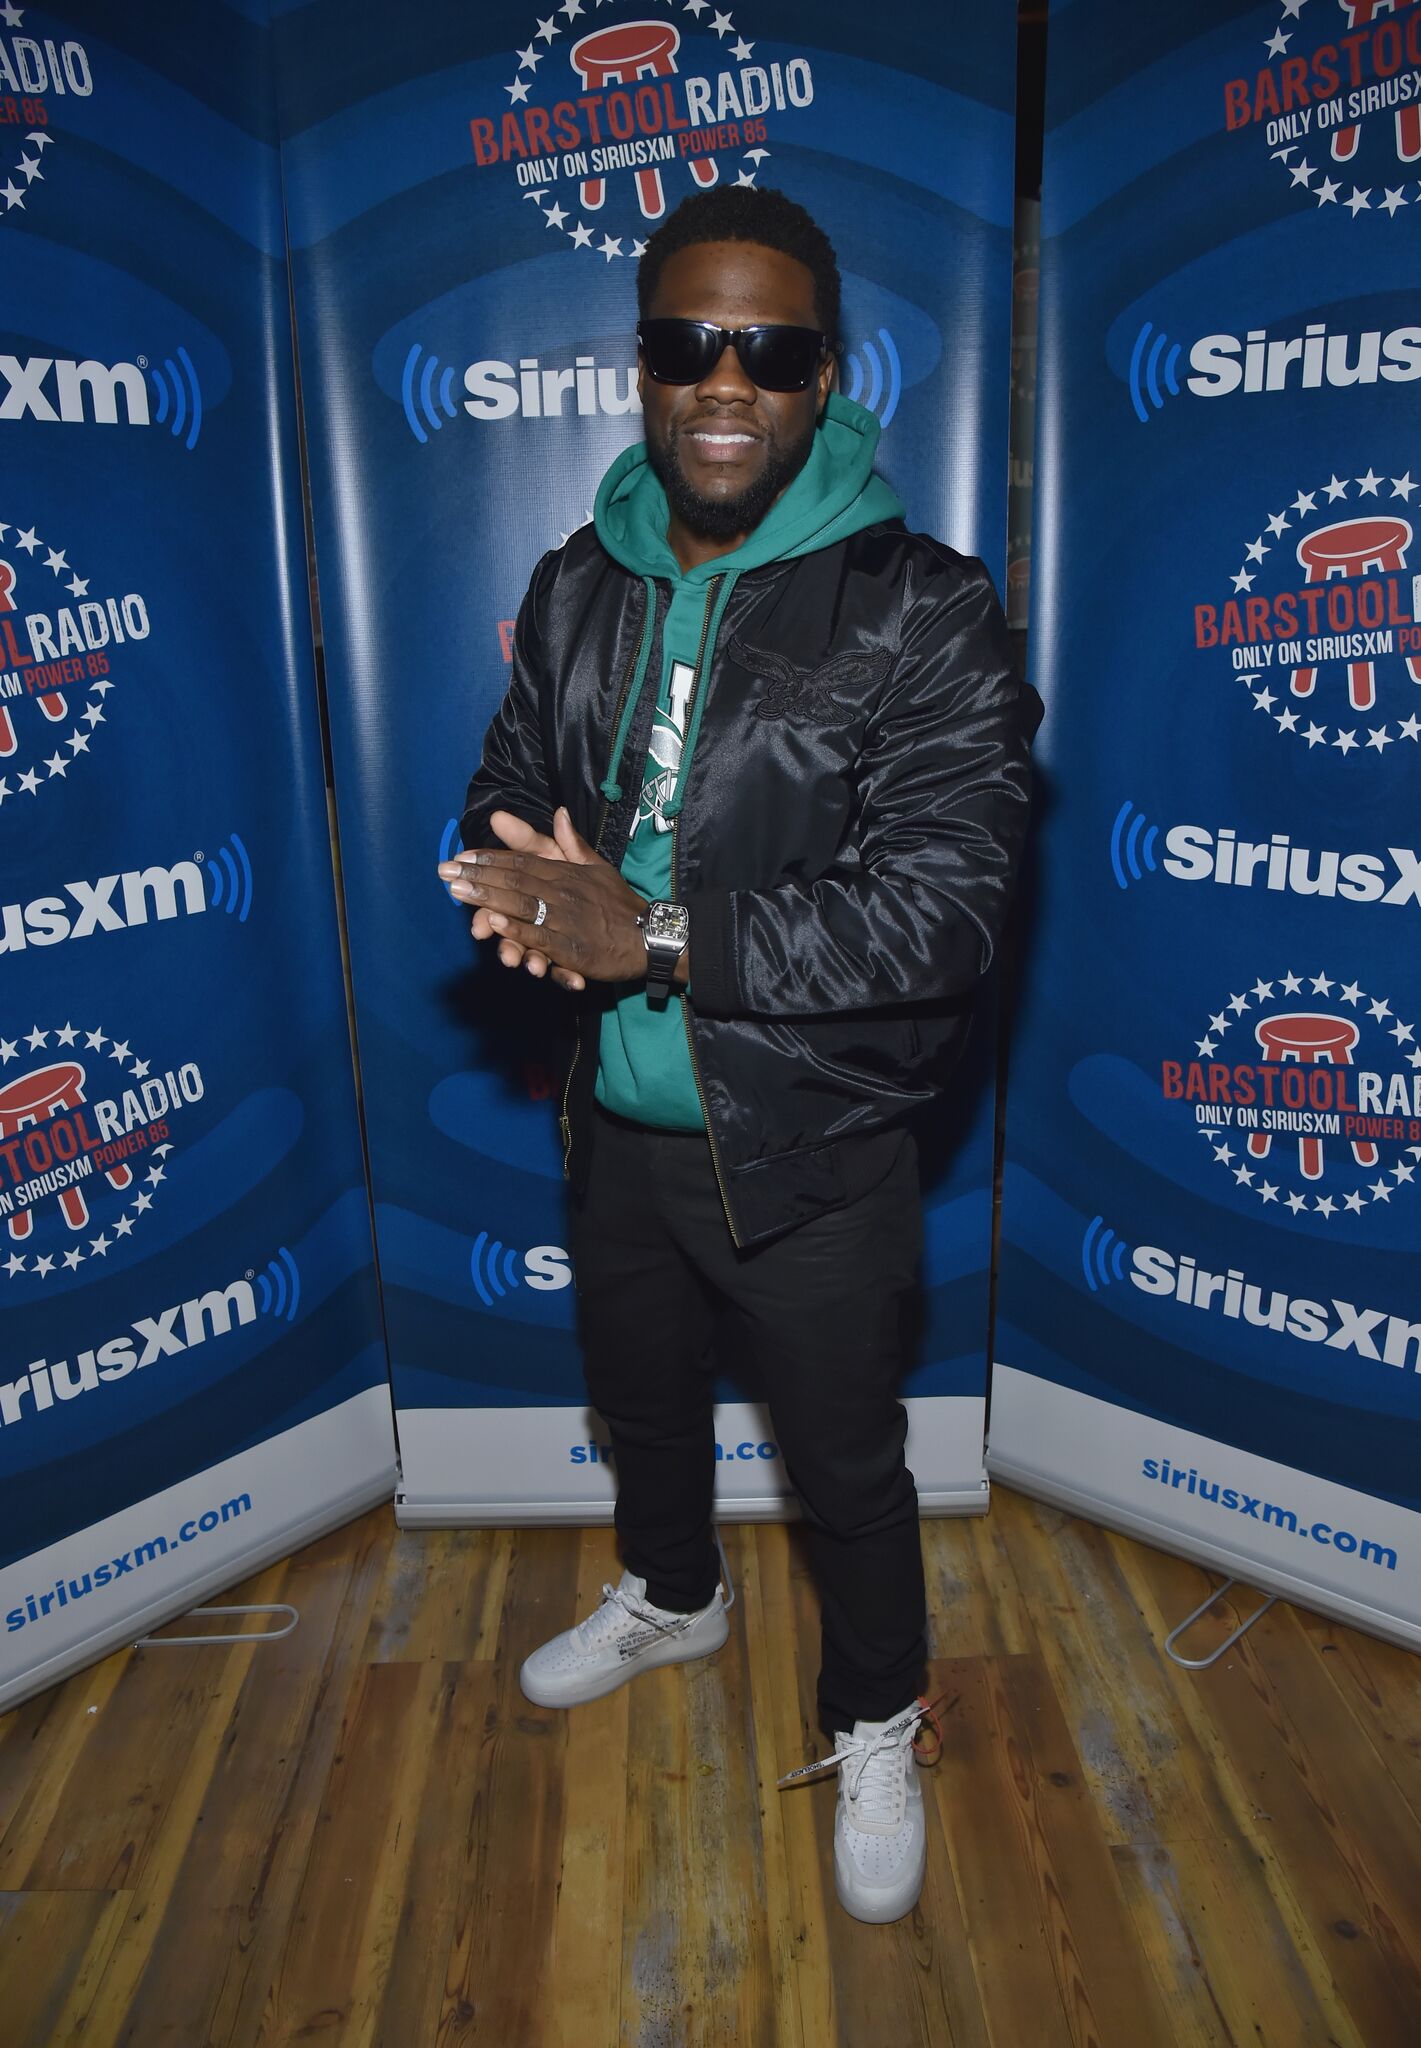 Kevin Hart attends Kevin Hart Live on Barstool Radio on SiriusXM at Super Bowl LII on February 2, 2018 in Minneapolis, Minnesota. l Getty Images